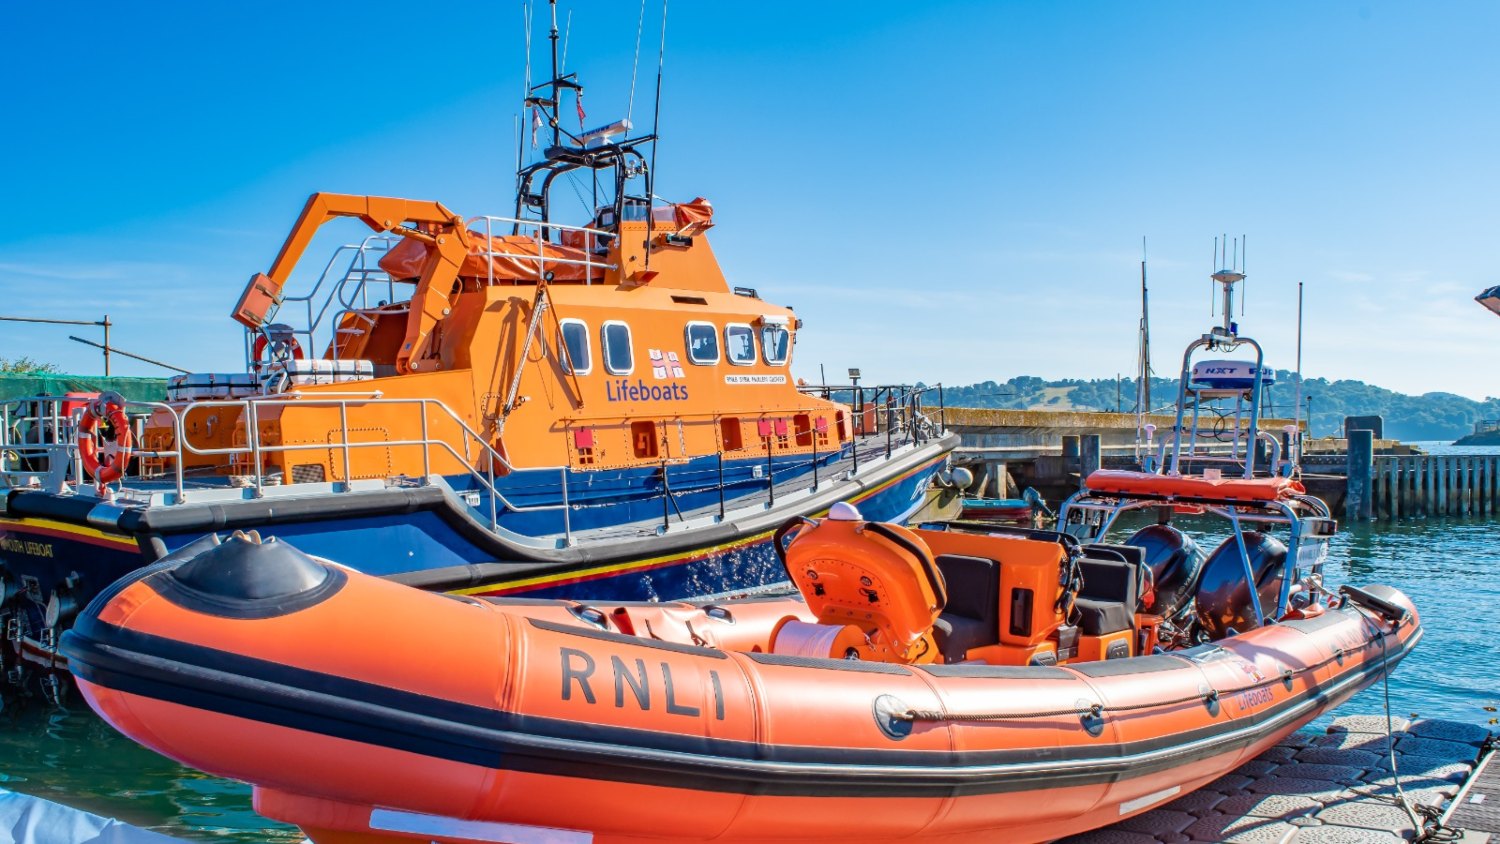 Plymouth's lifeboats on the water